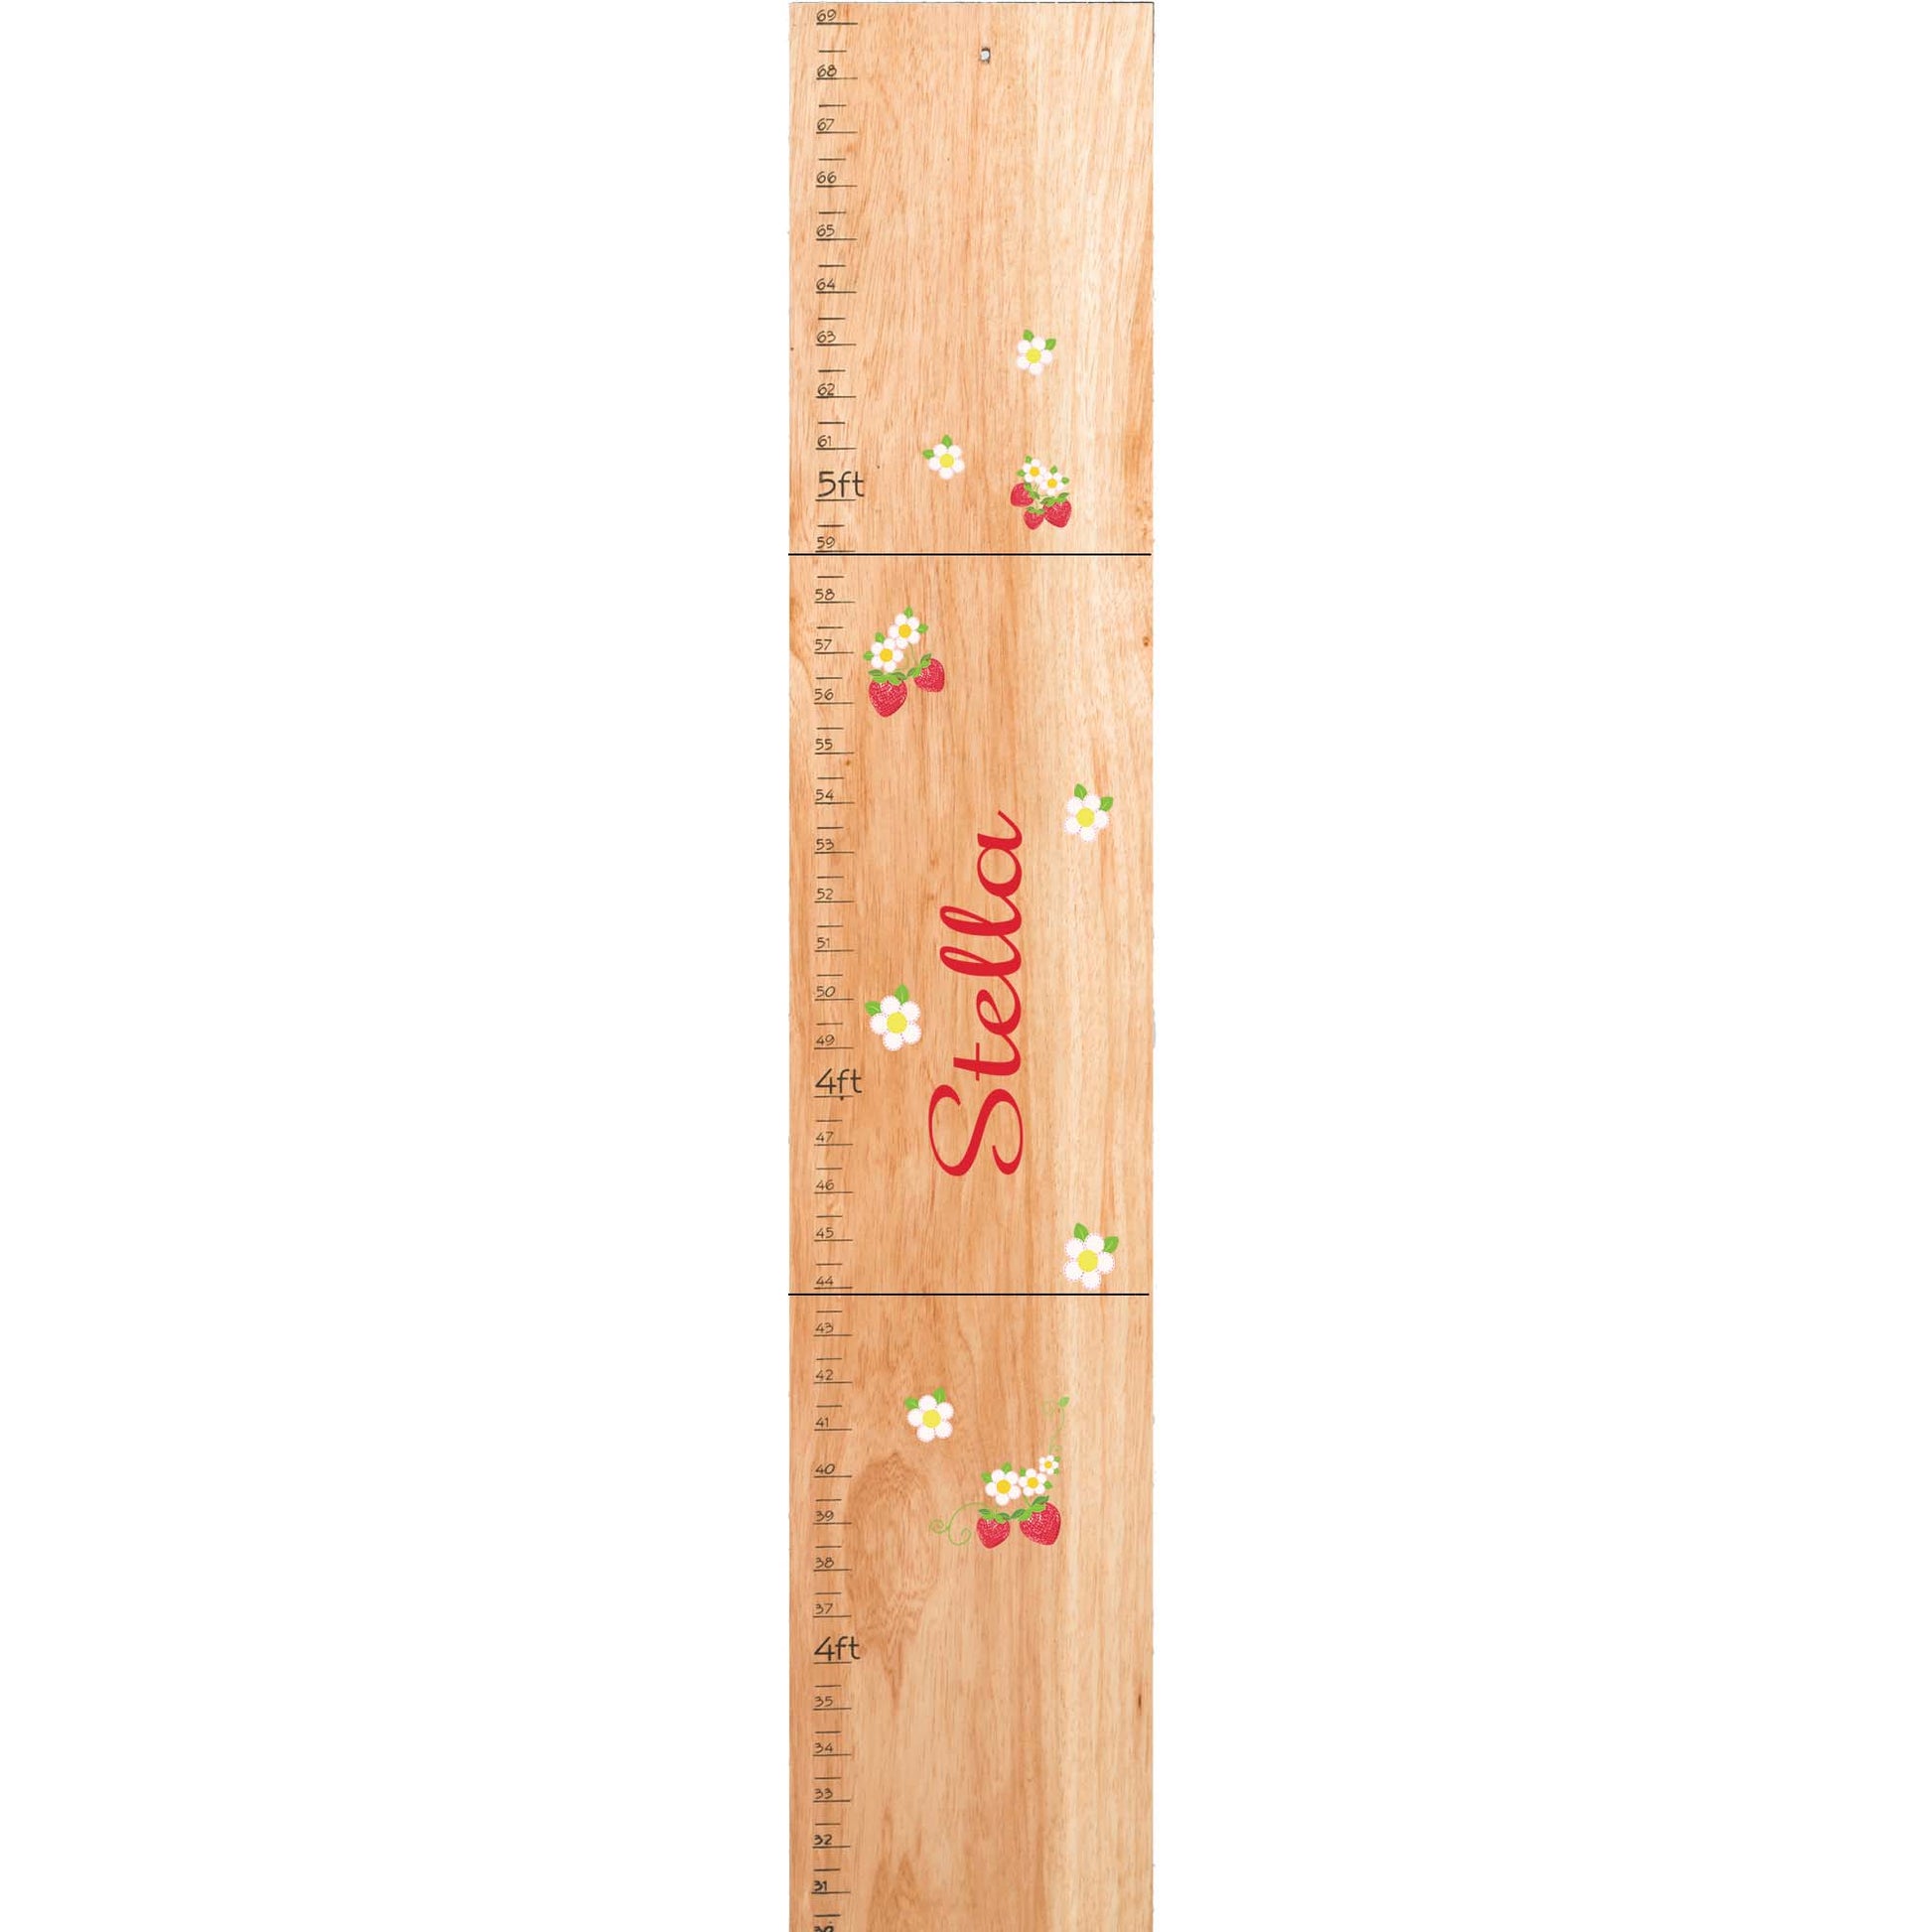 Personalized Natural Wooden Growth Chart with Pink Princess Crown design